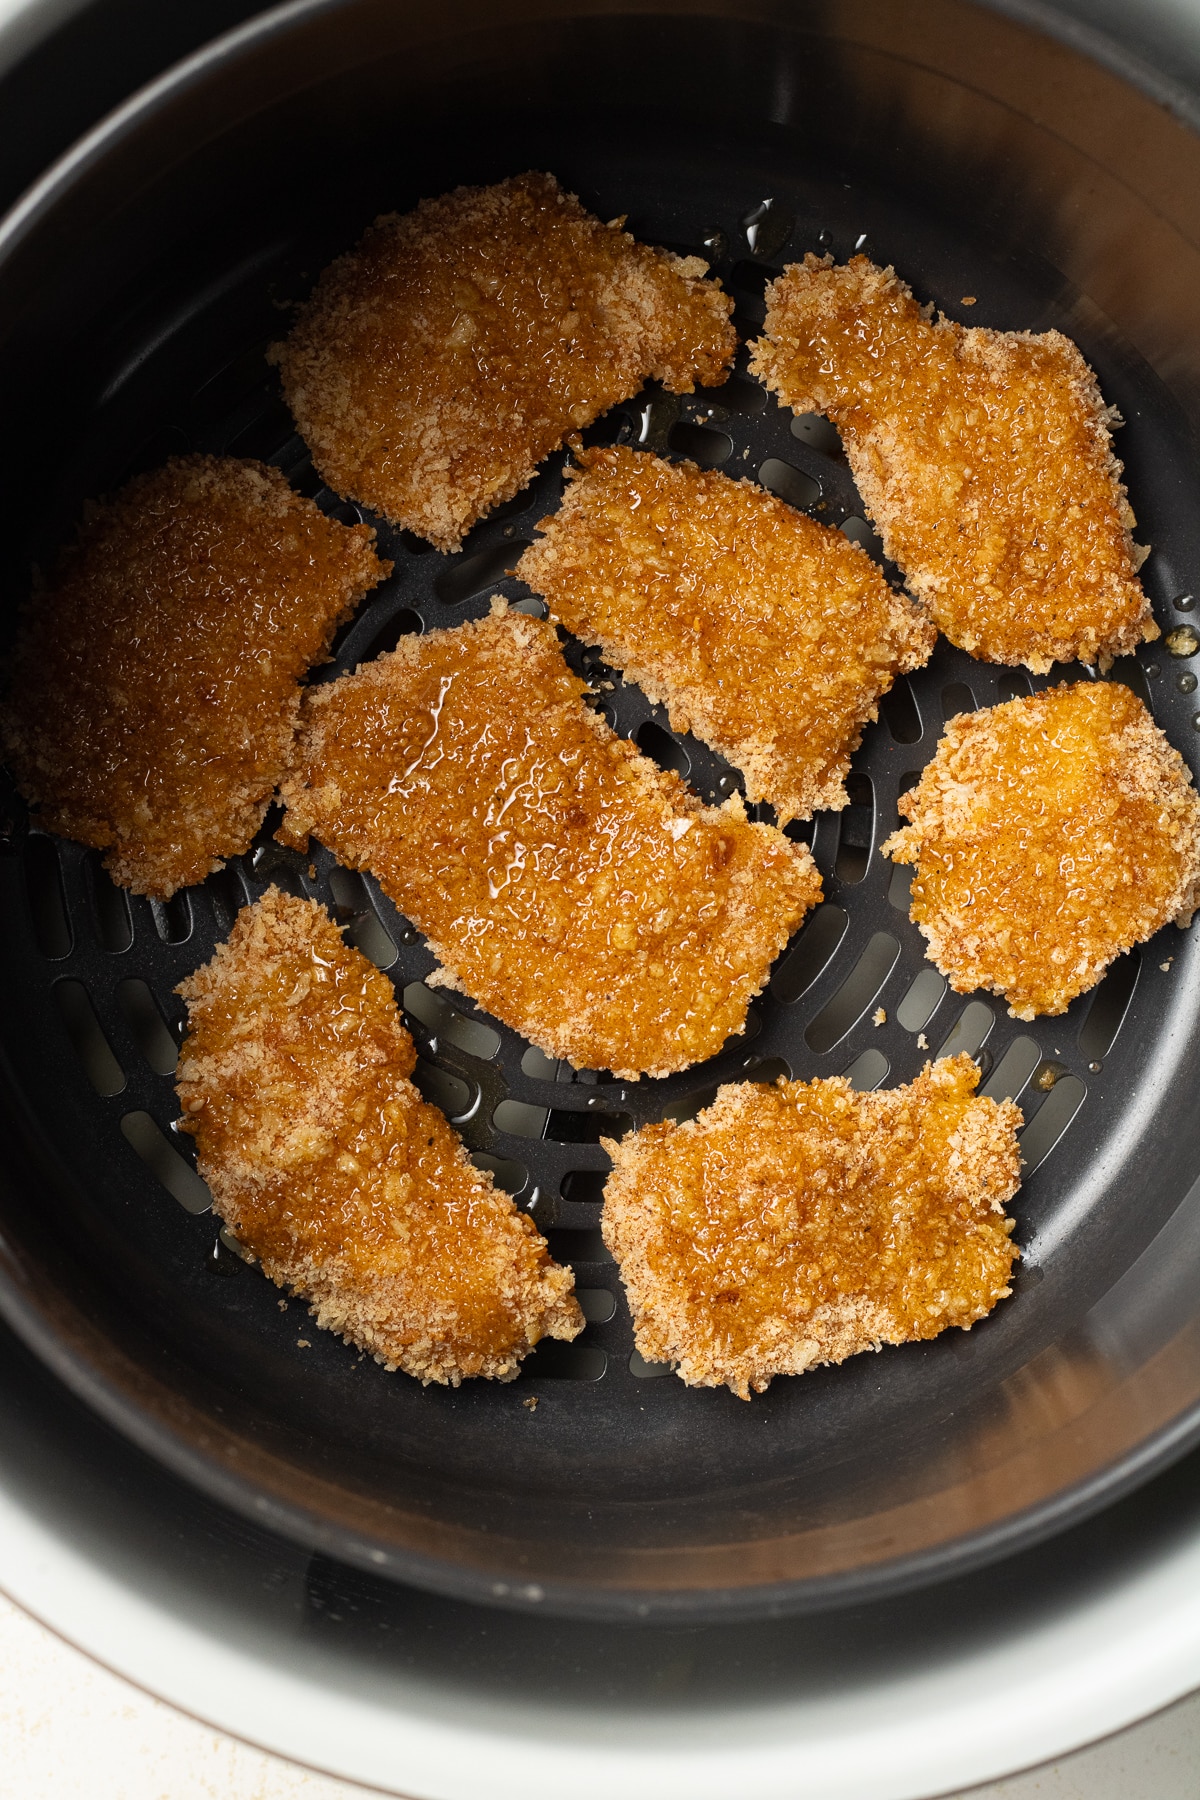 Breaded chicken pieces brushed with oil in an air fryer basket.